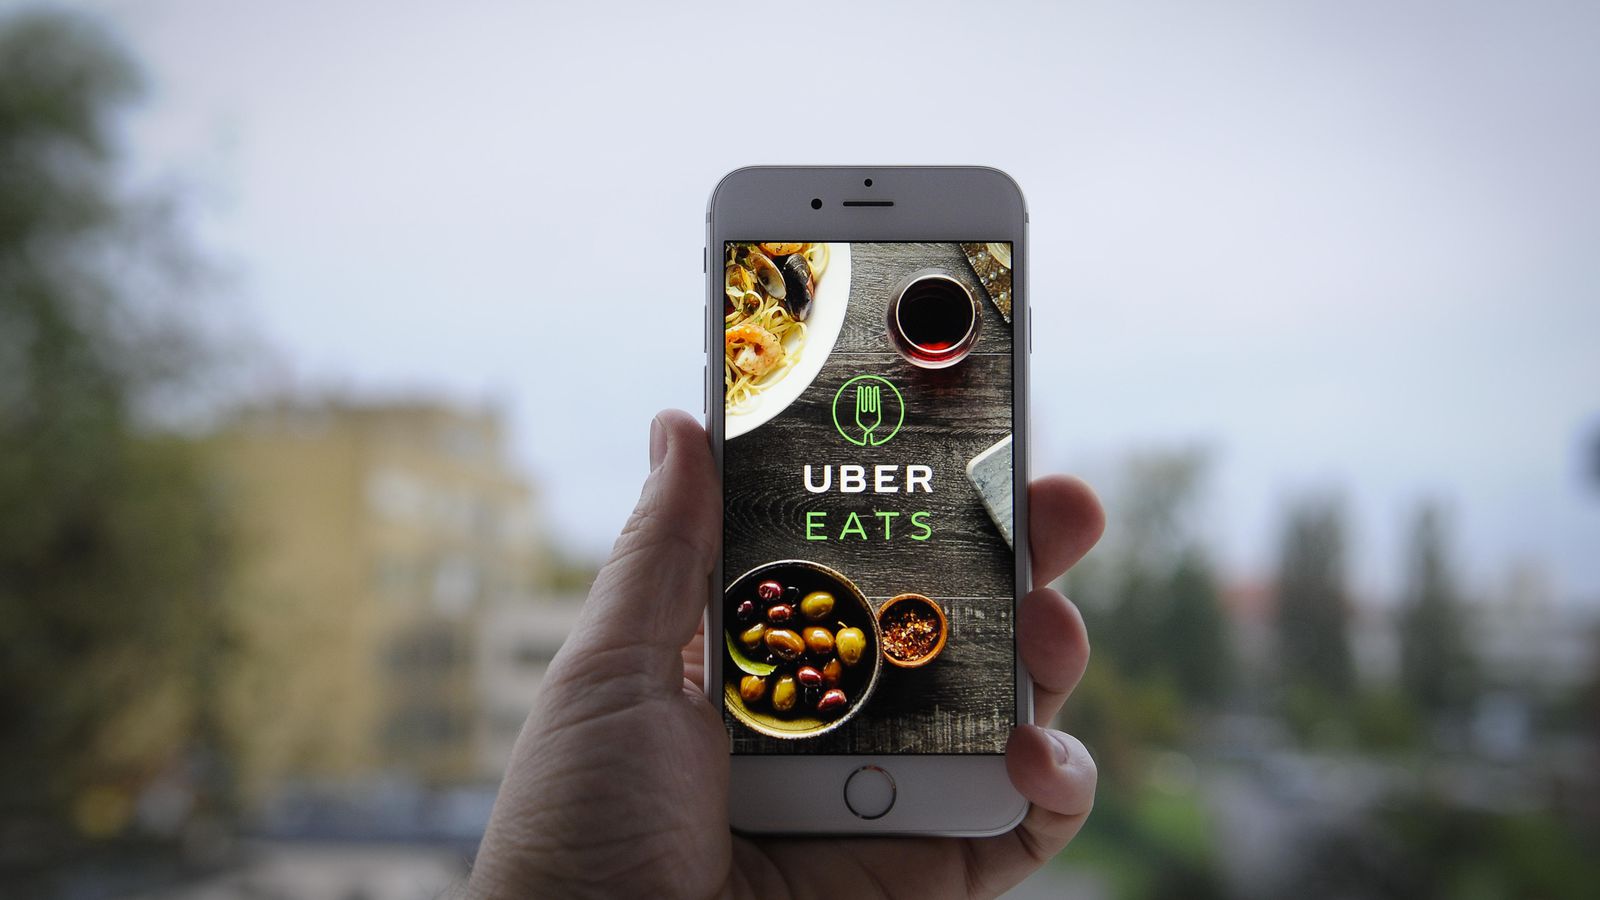 51 HQ Photos Uber Eats Delivery Driver App / Uber Eats Driver Busted Pleasuring Himself After Food ...